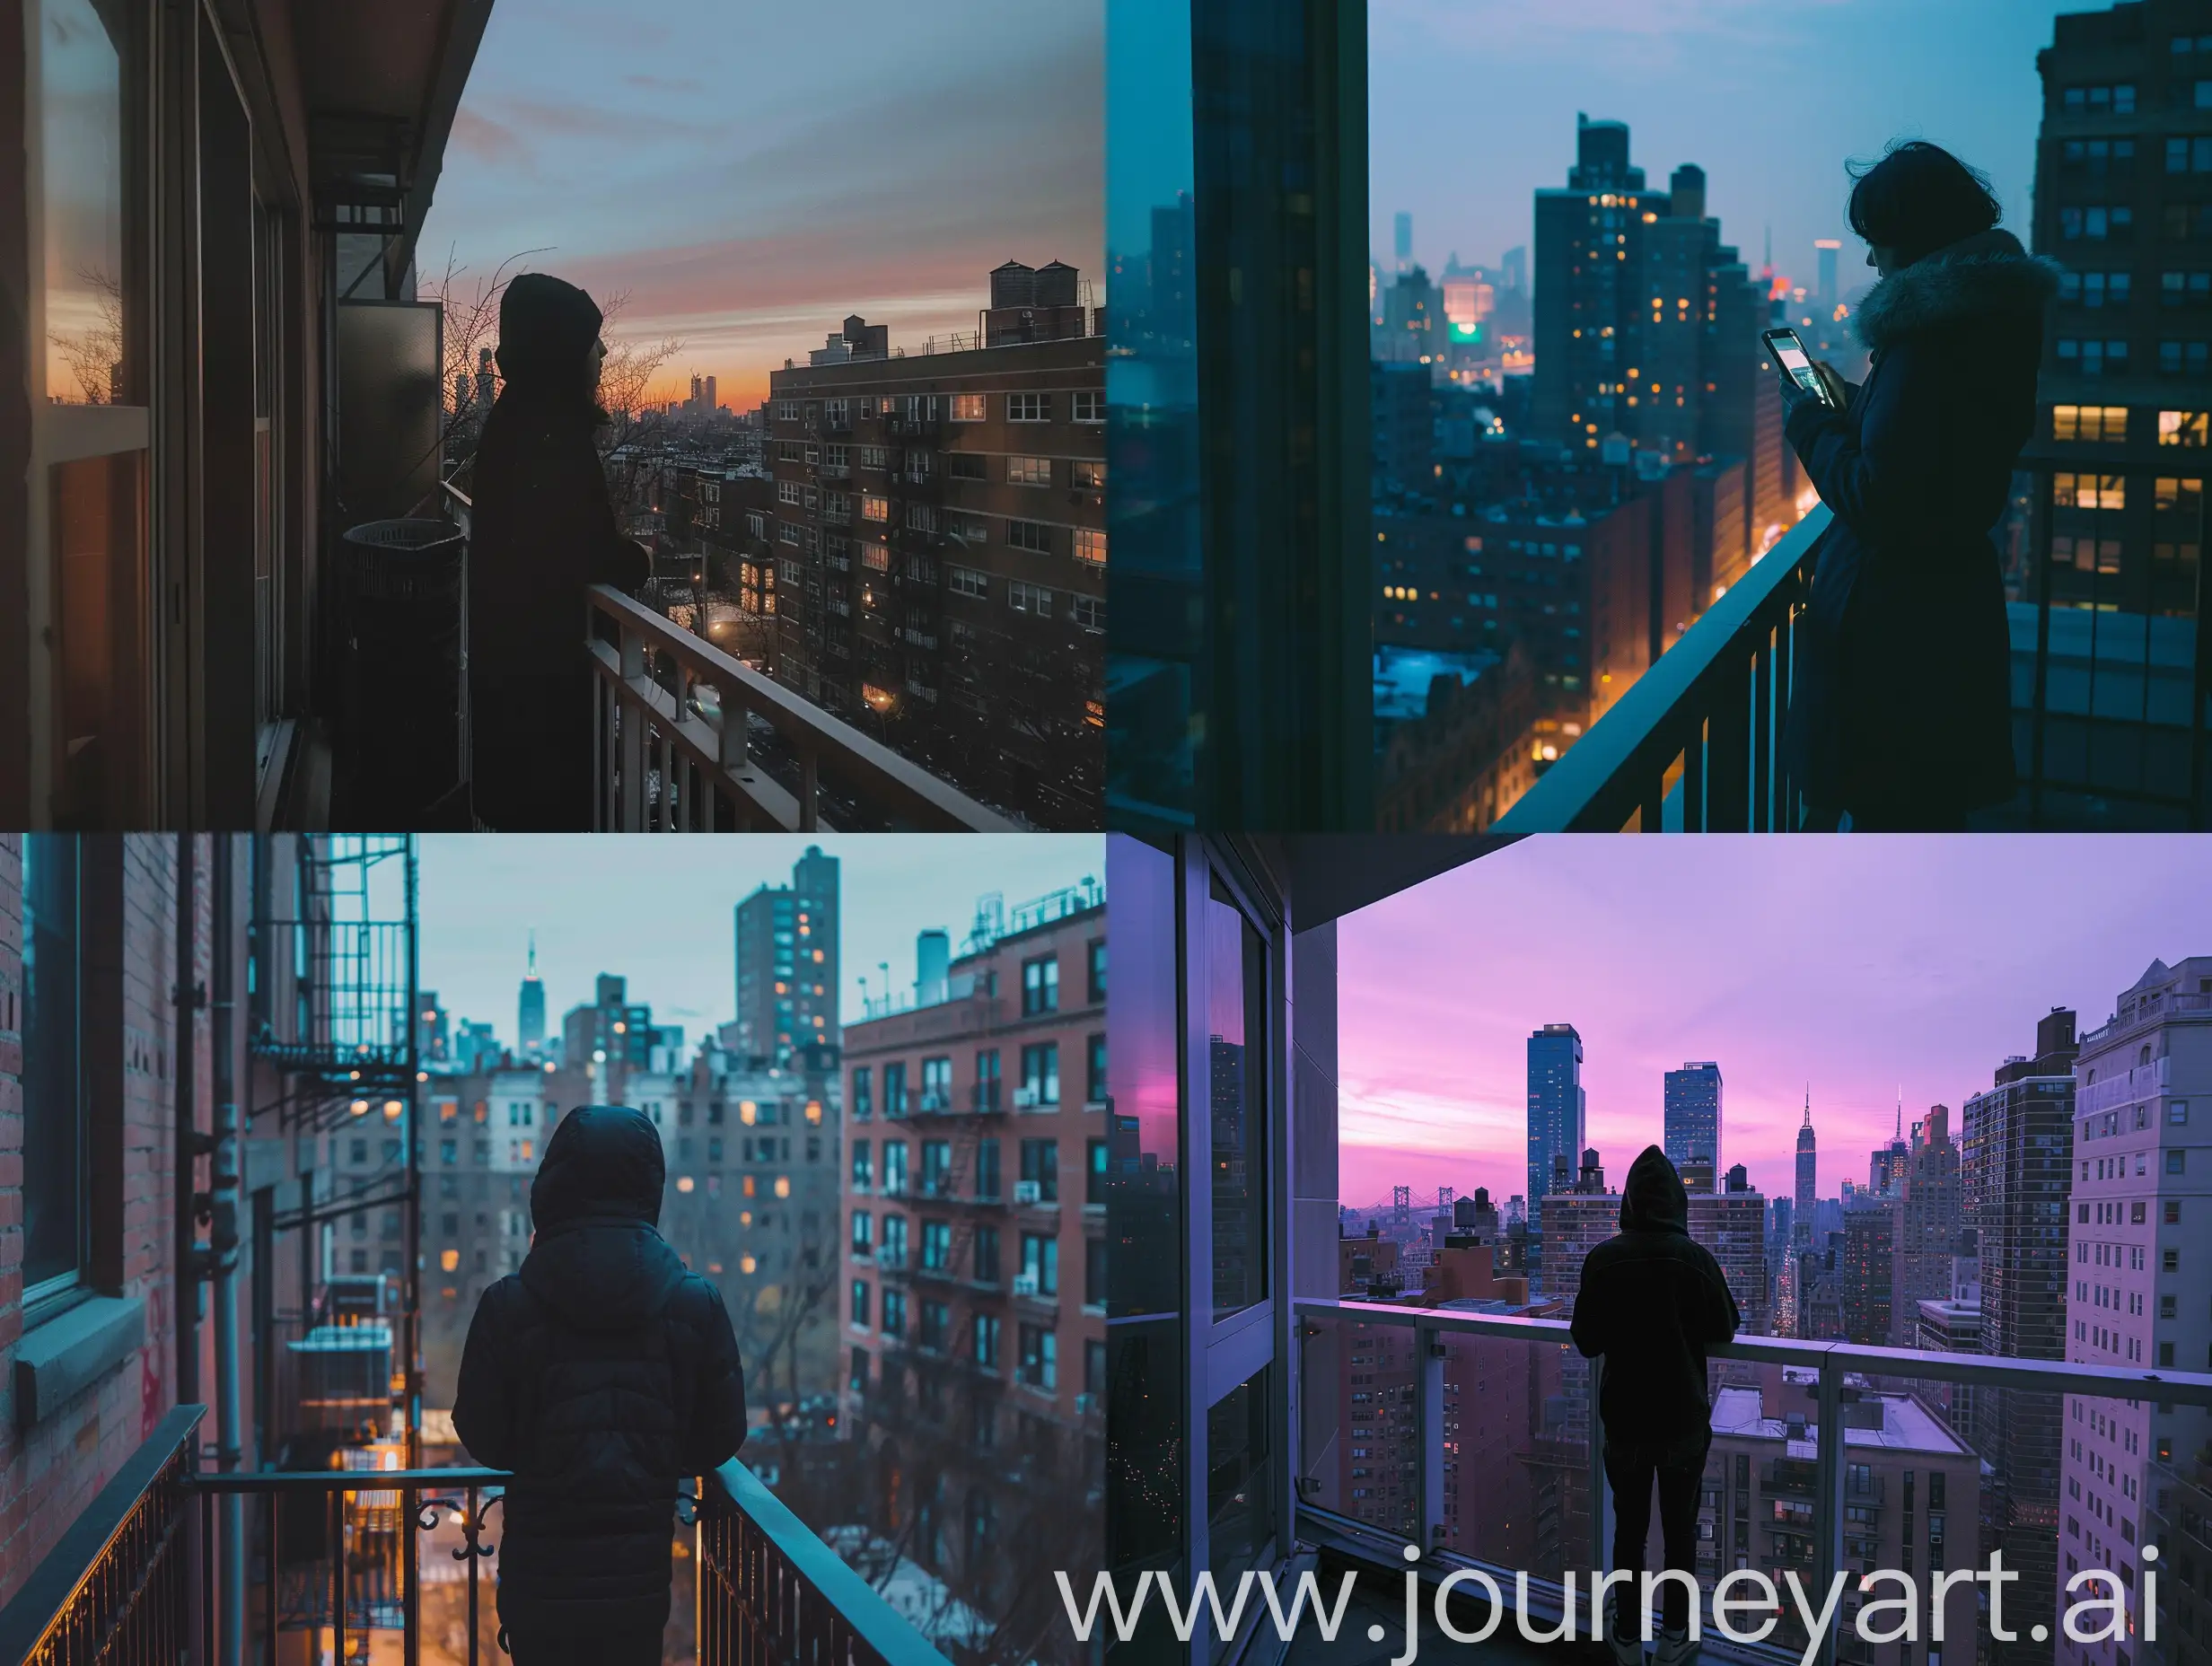 a phone photo of a person standing on the balcony, soft lighting, style raw posted on reddit in 2019,, environment, looking at a city, new york, day time

